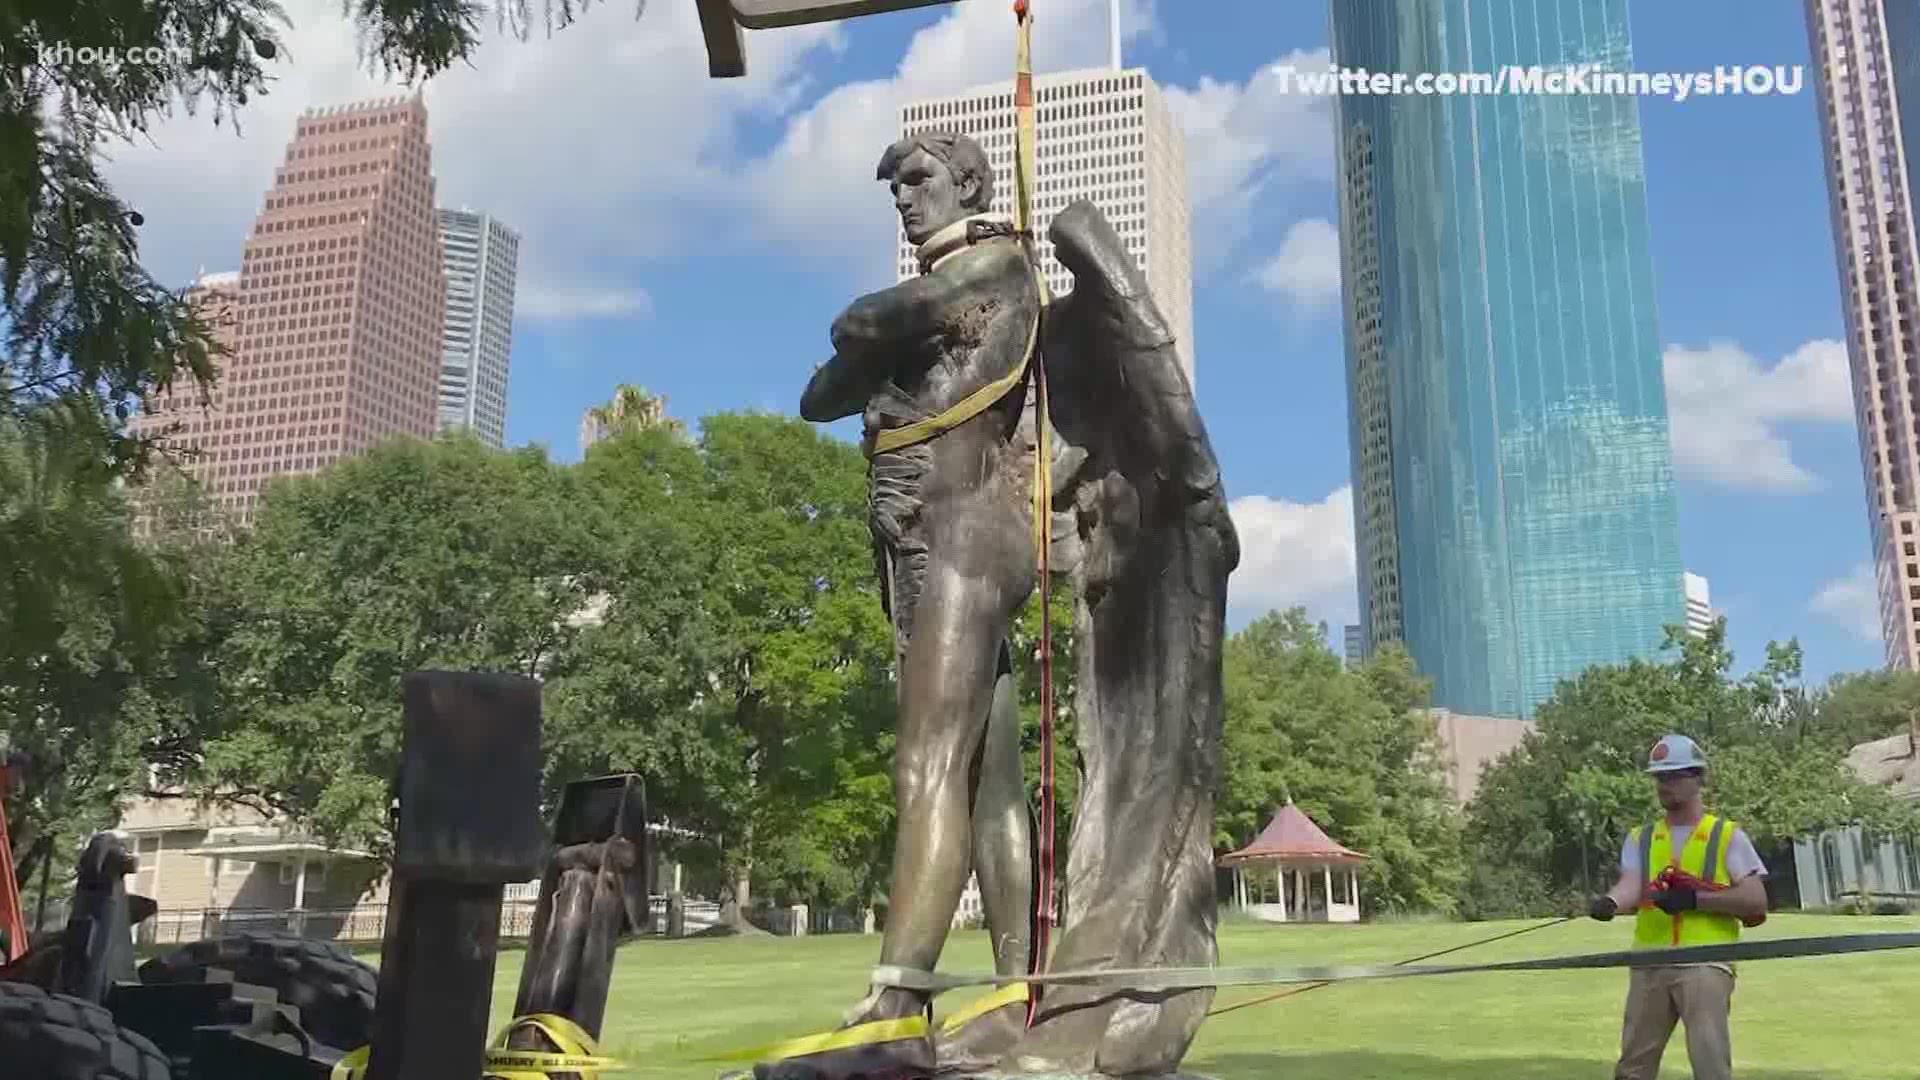 The statue will be later placed at the Houston Museum of African-American Culture.